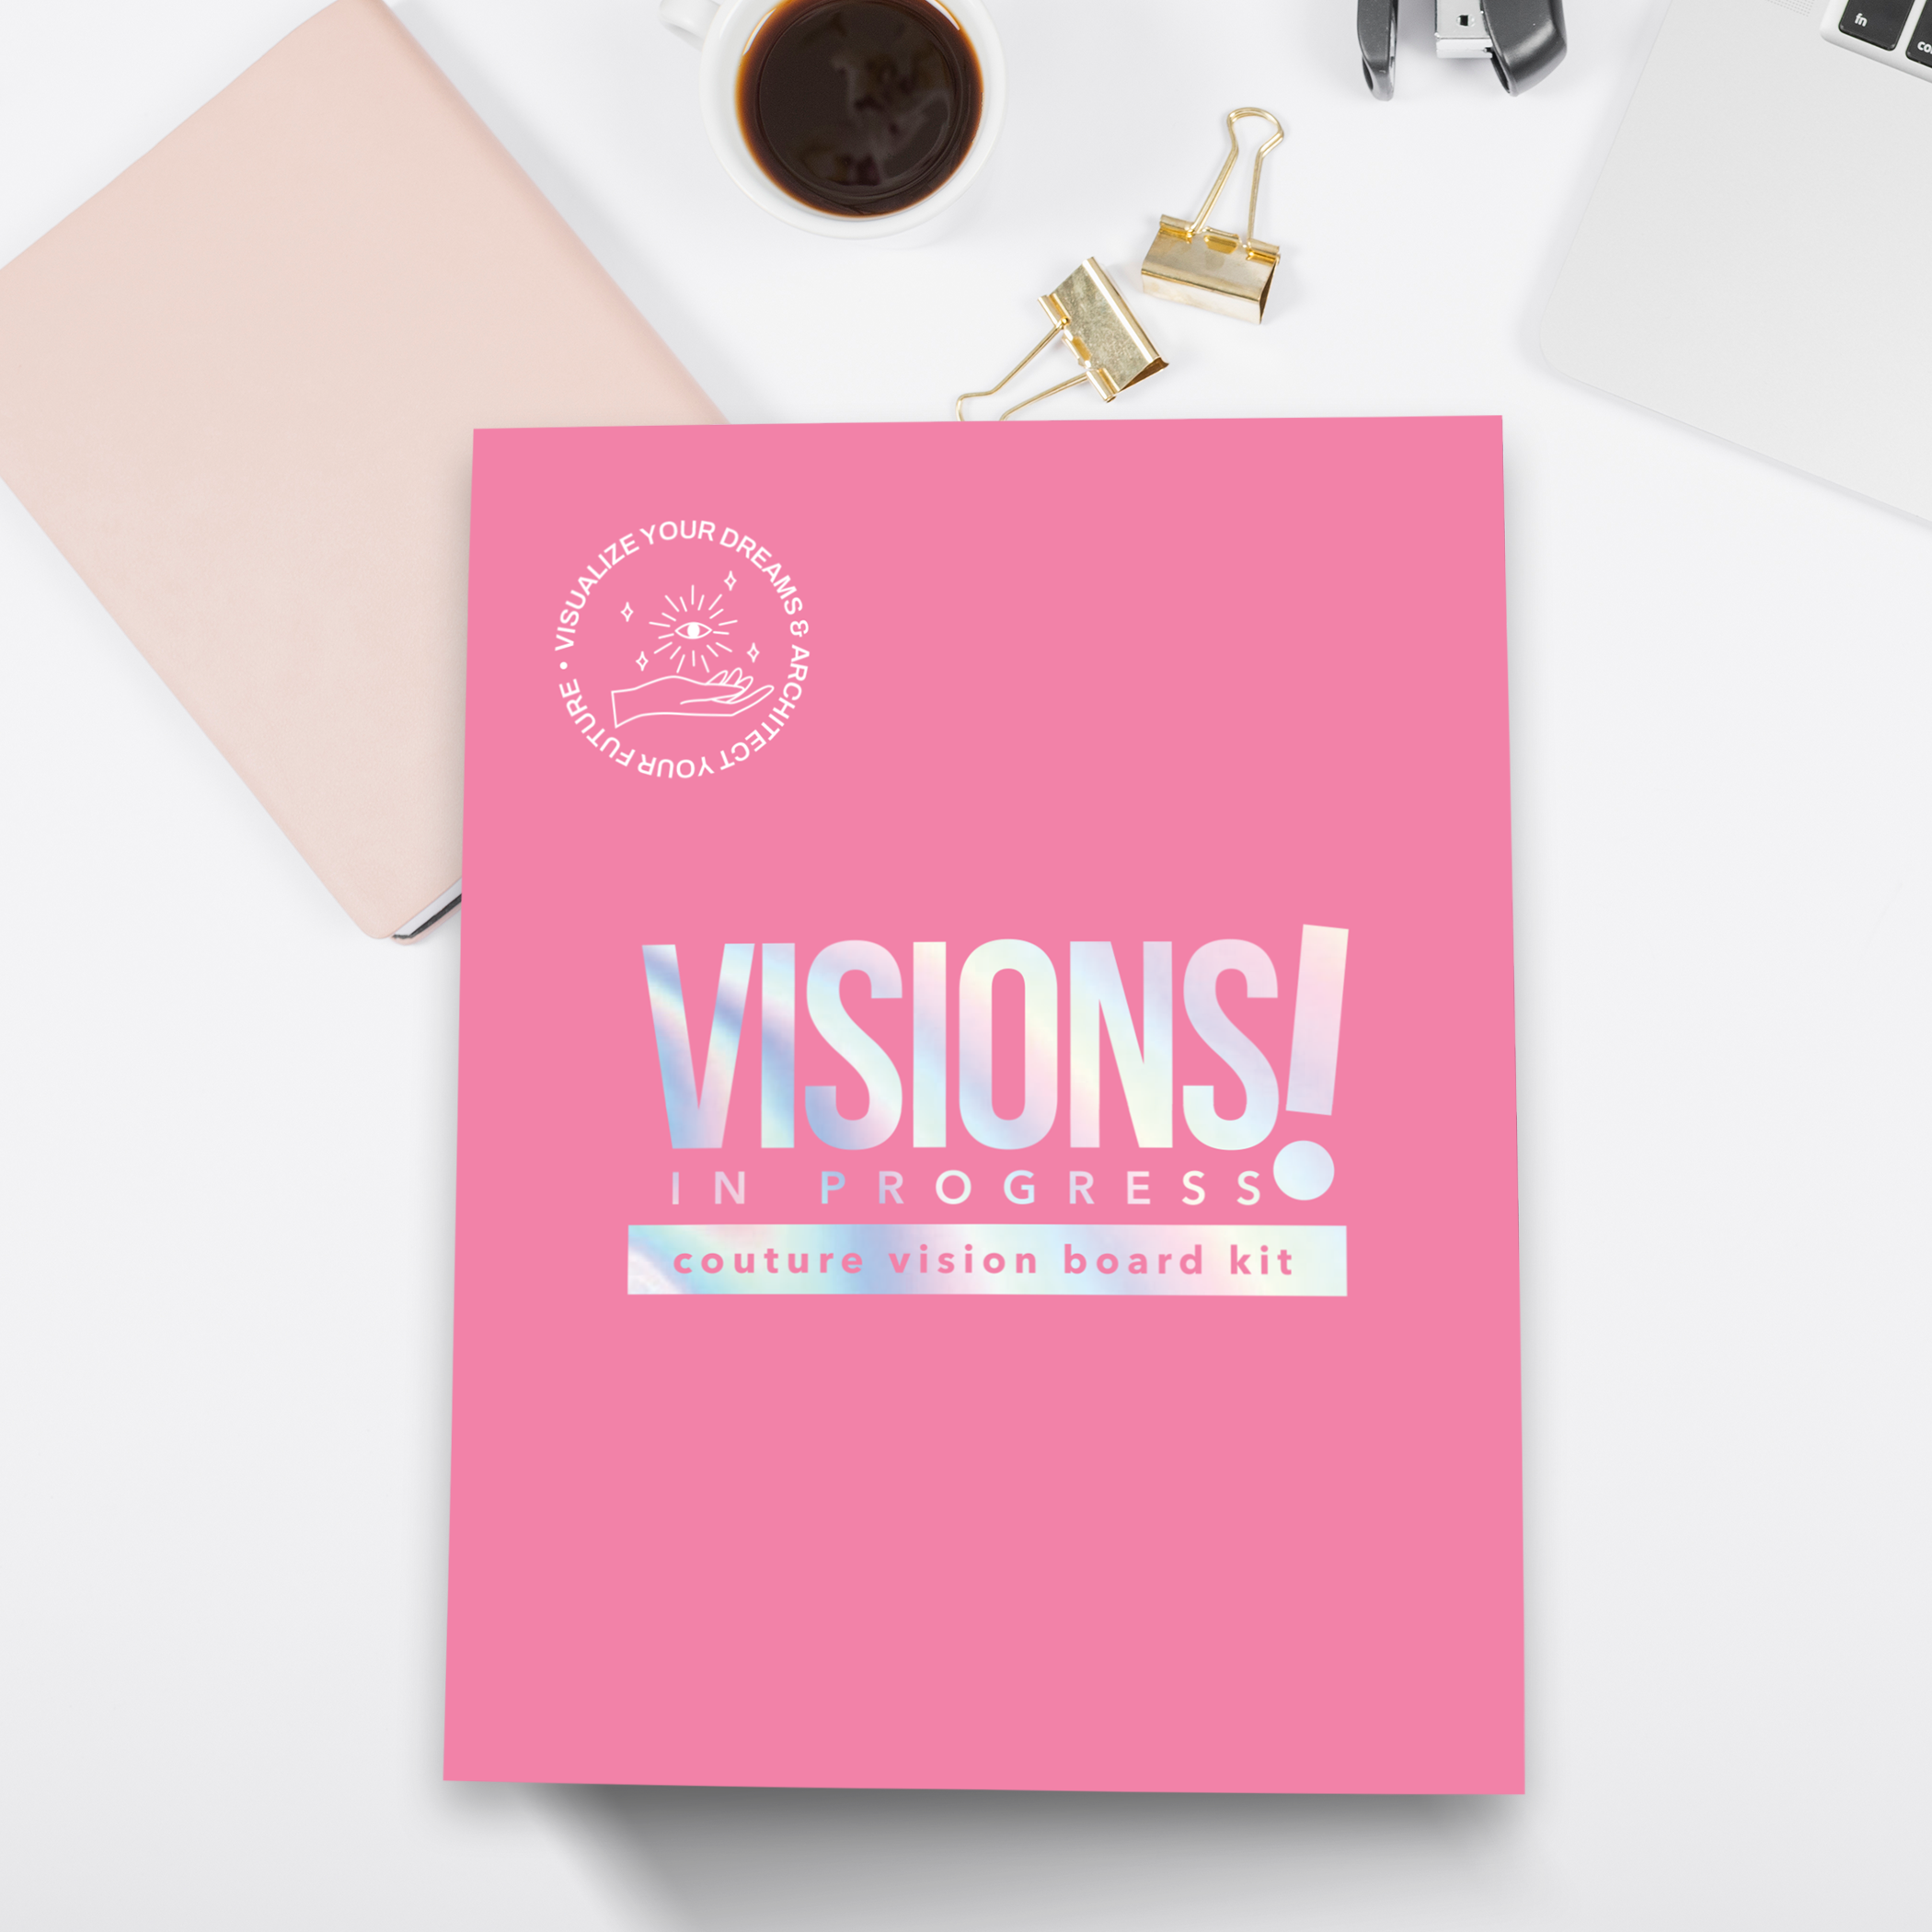 Vision Board Kit - Visions In Progress Couture Vision Board